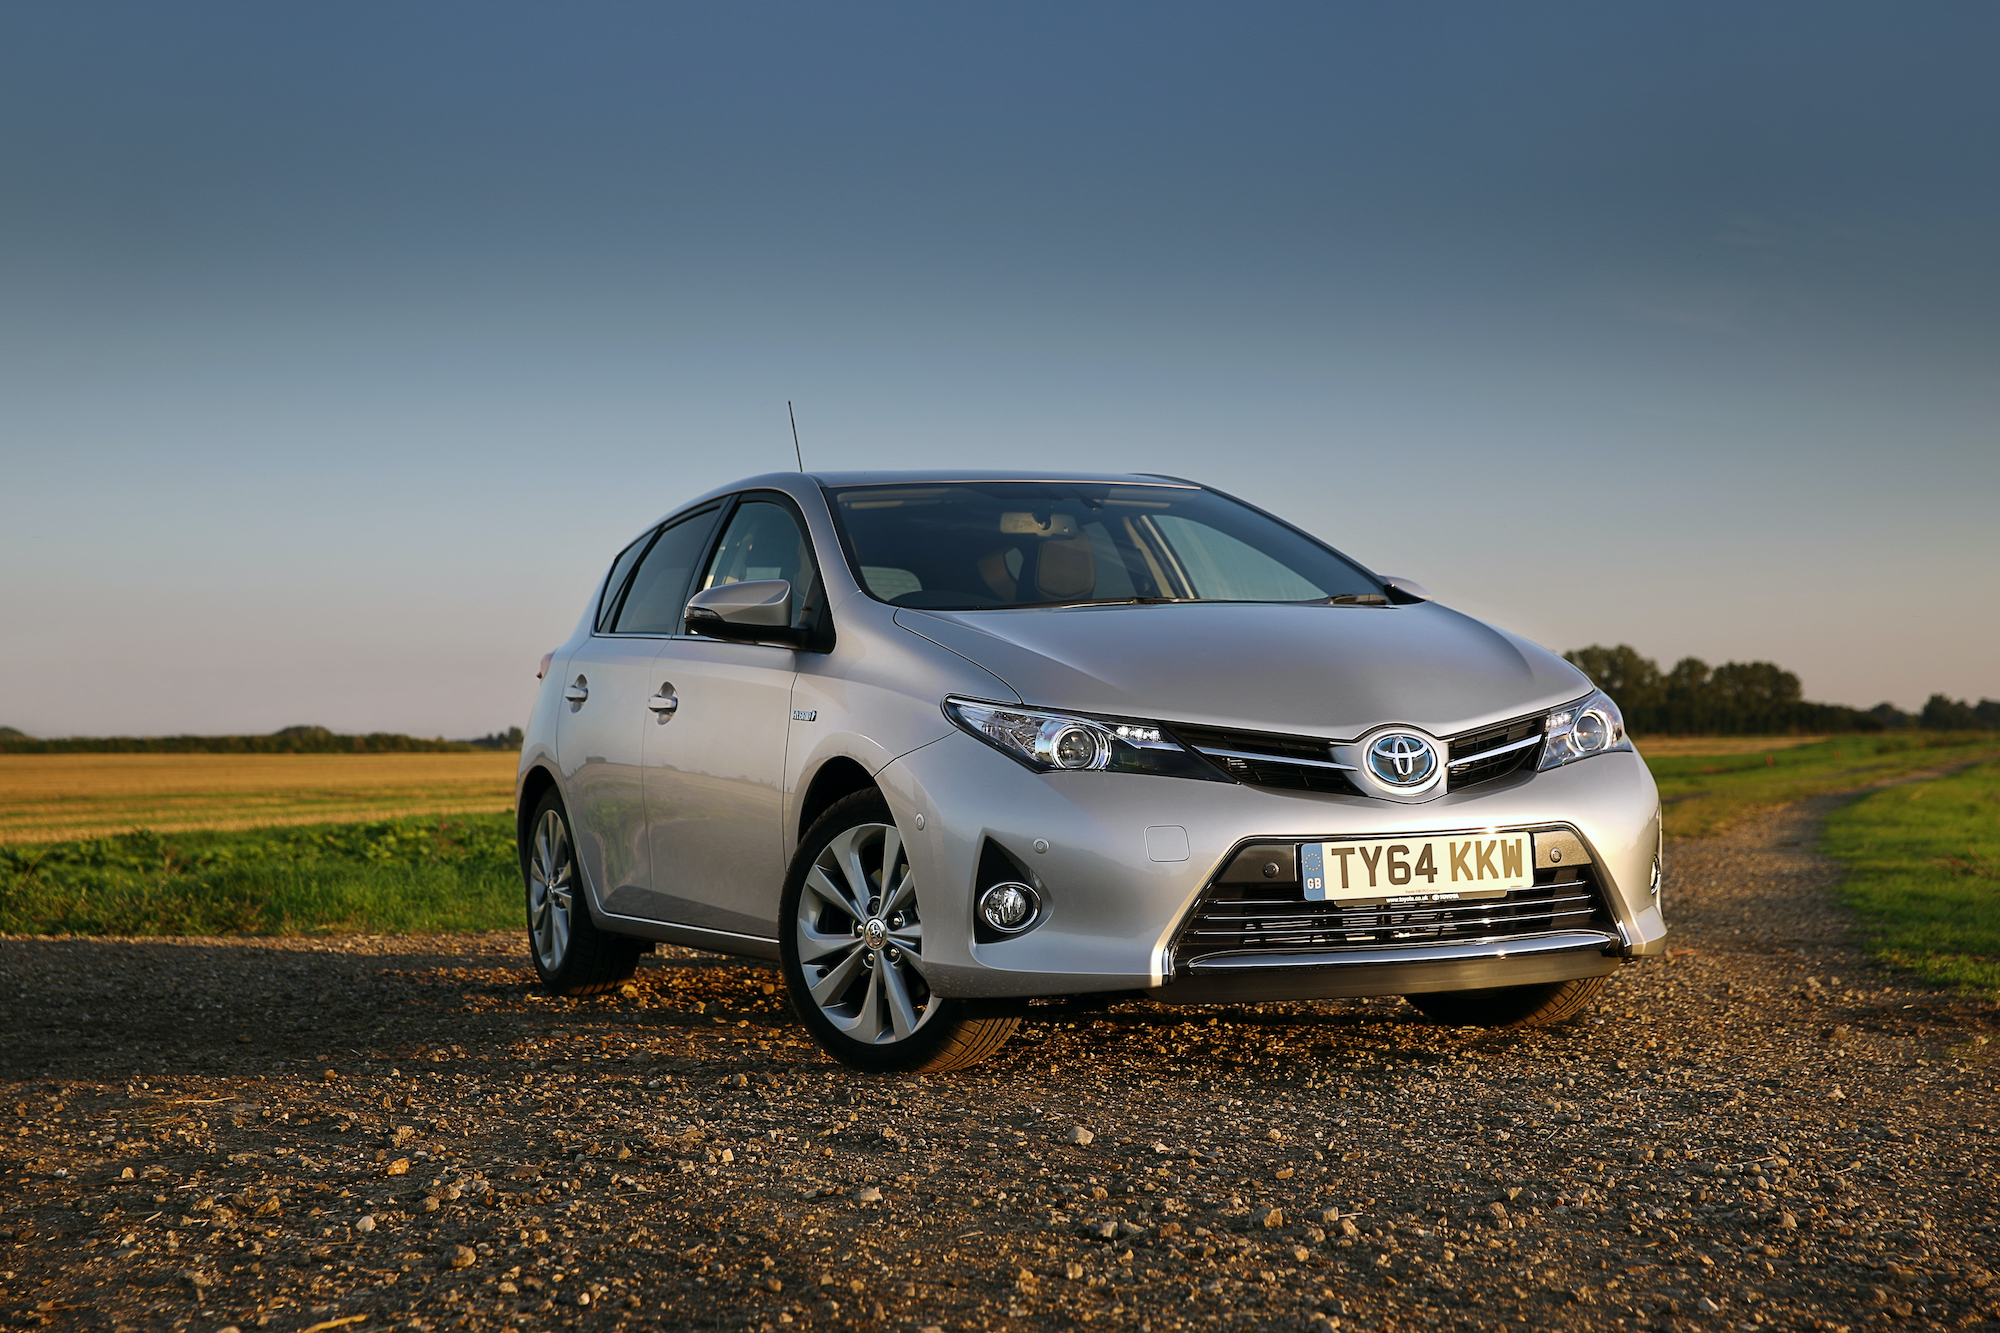 Used Toyota Auris Hatchback (2012 - 2019) Review